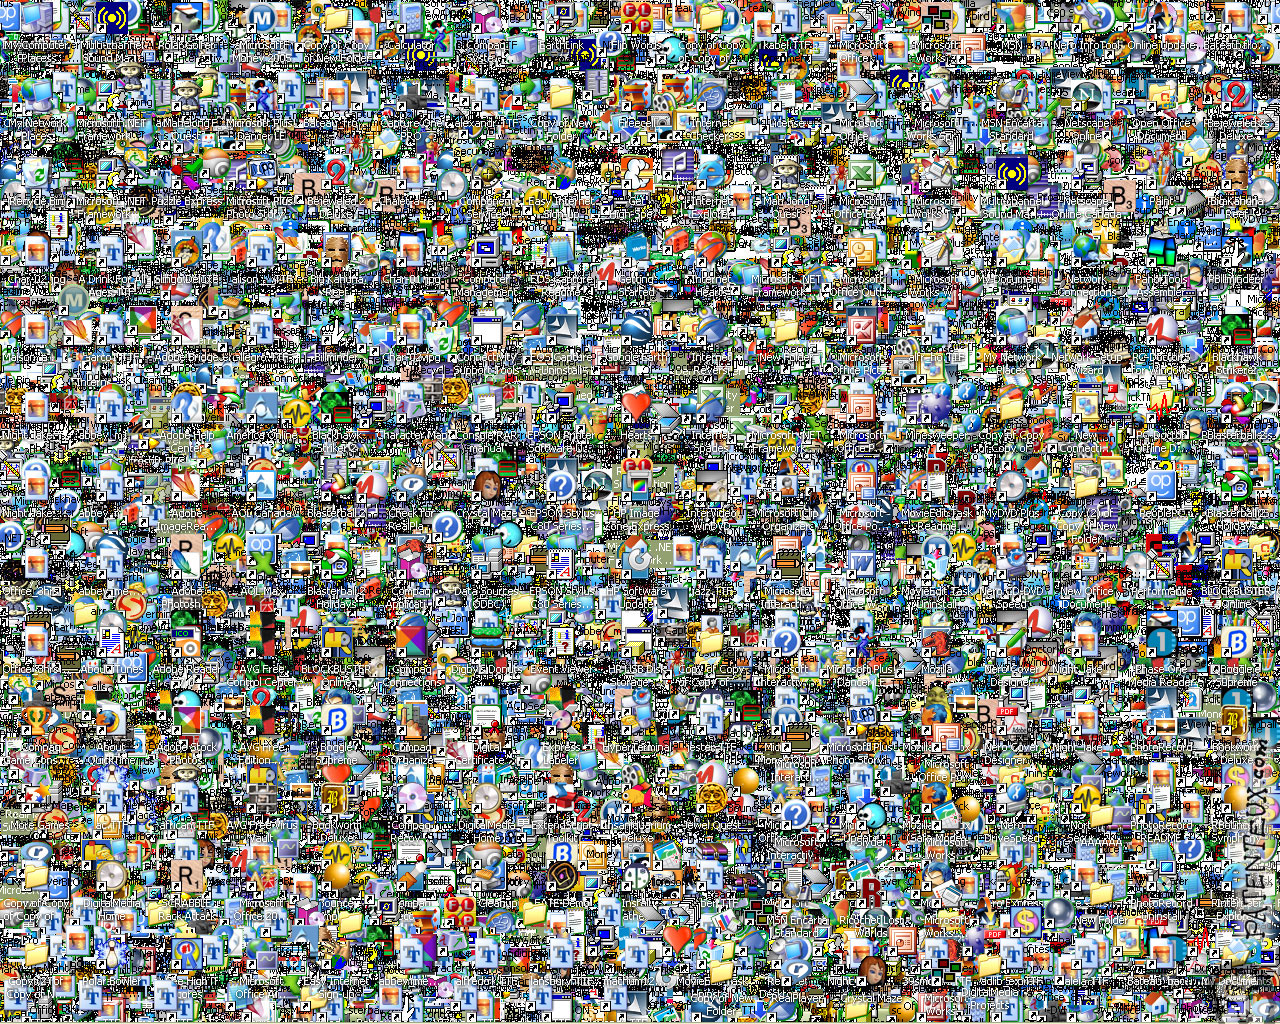  - The messiest wallpaper on the planet